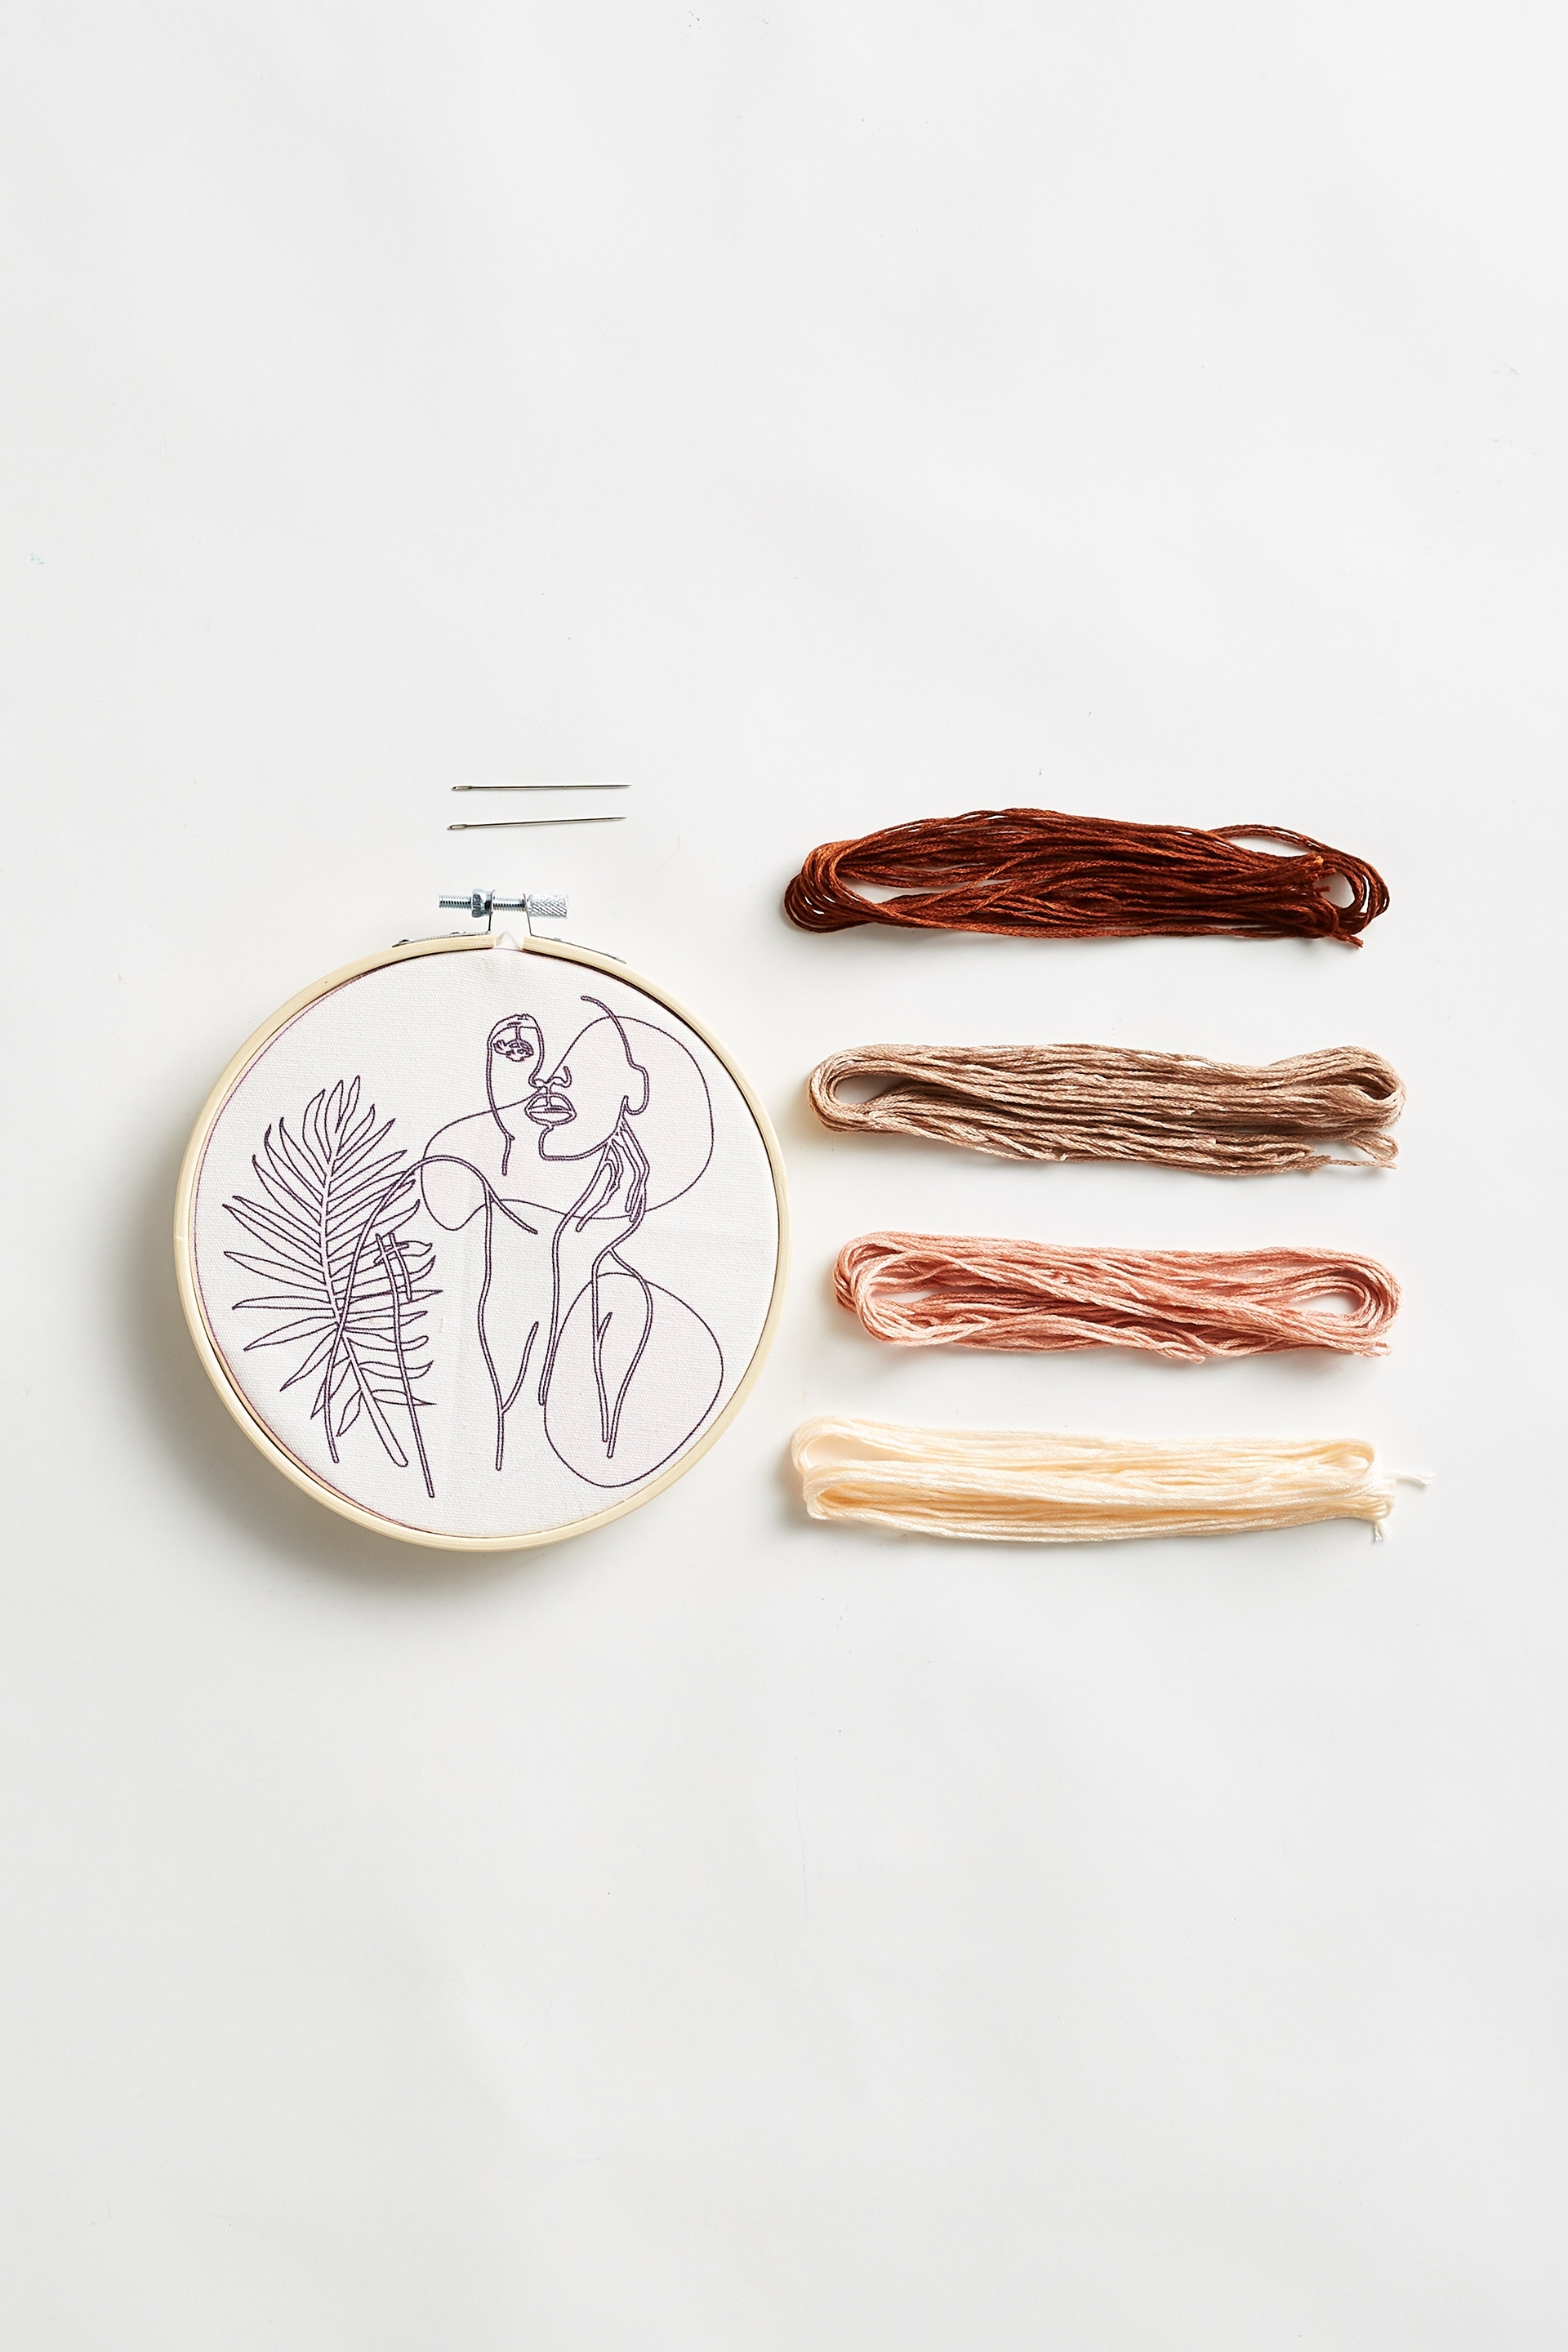 Typo - DIY Embroidery Kit - Embroidery kit - femme lineart